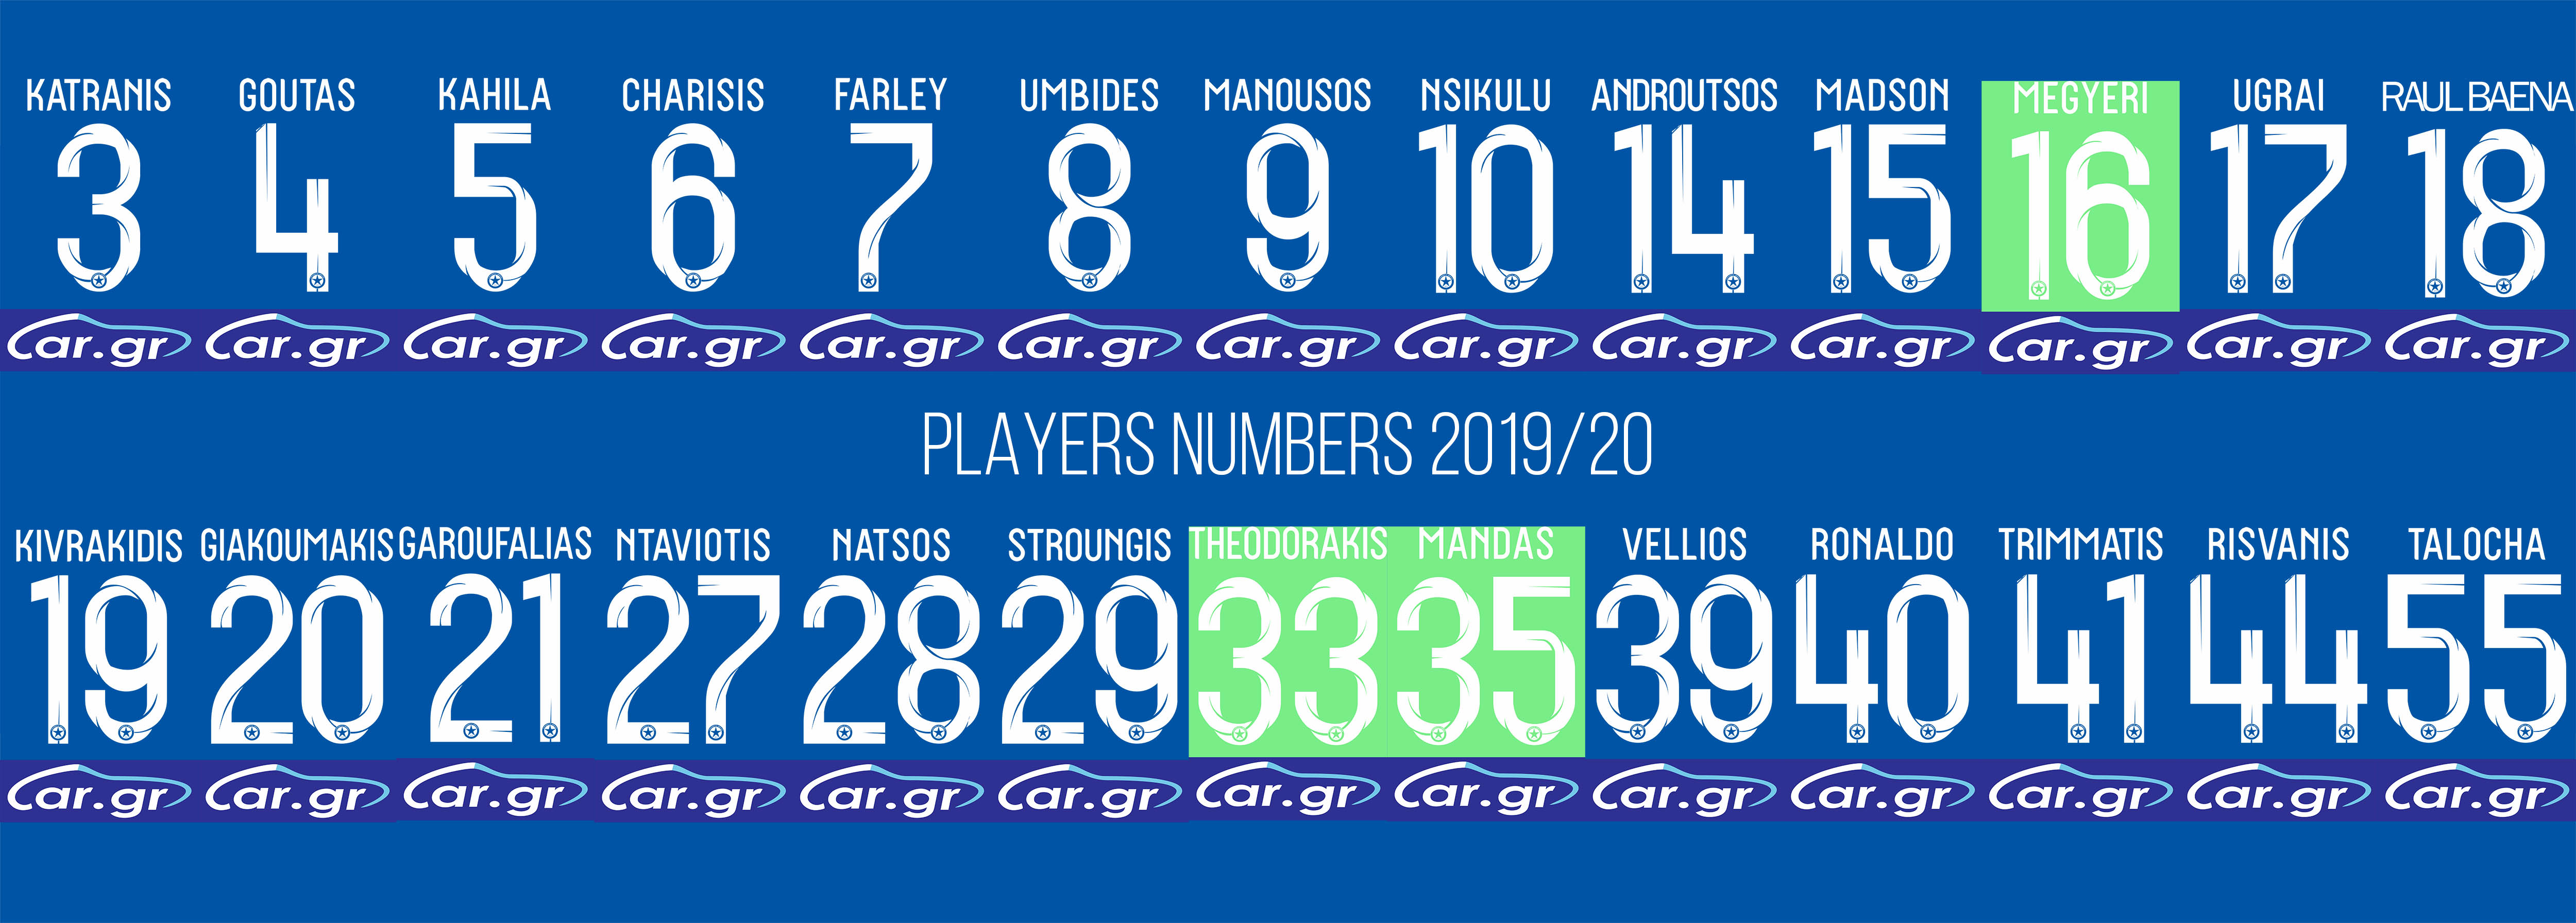 players numbers